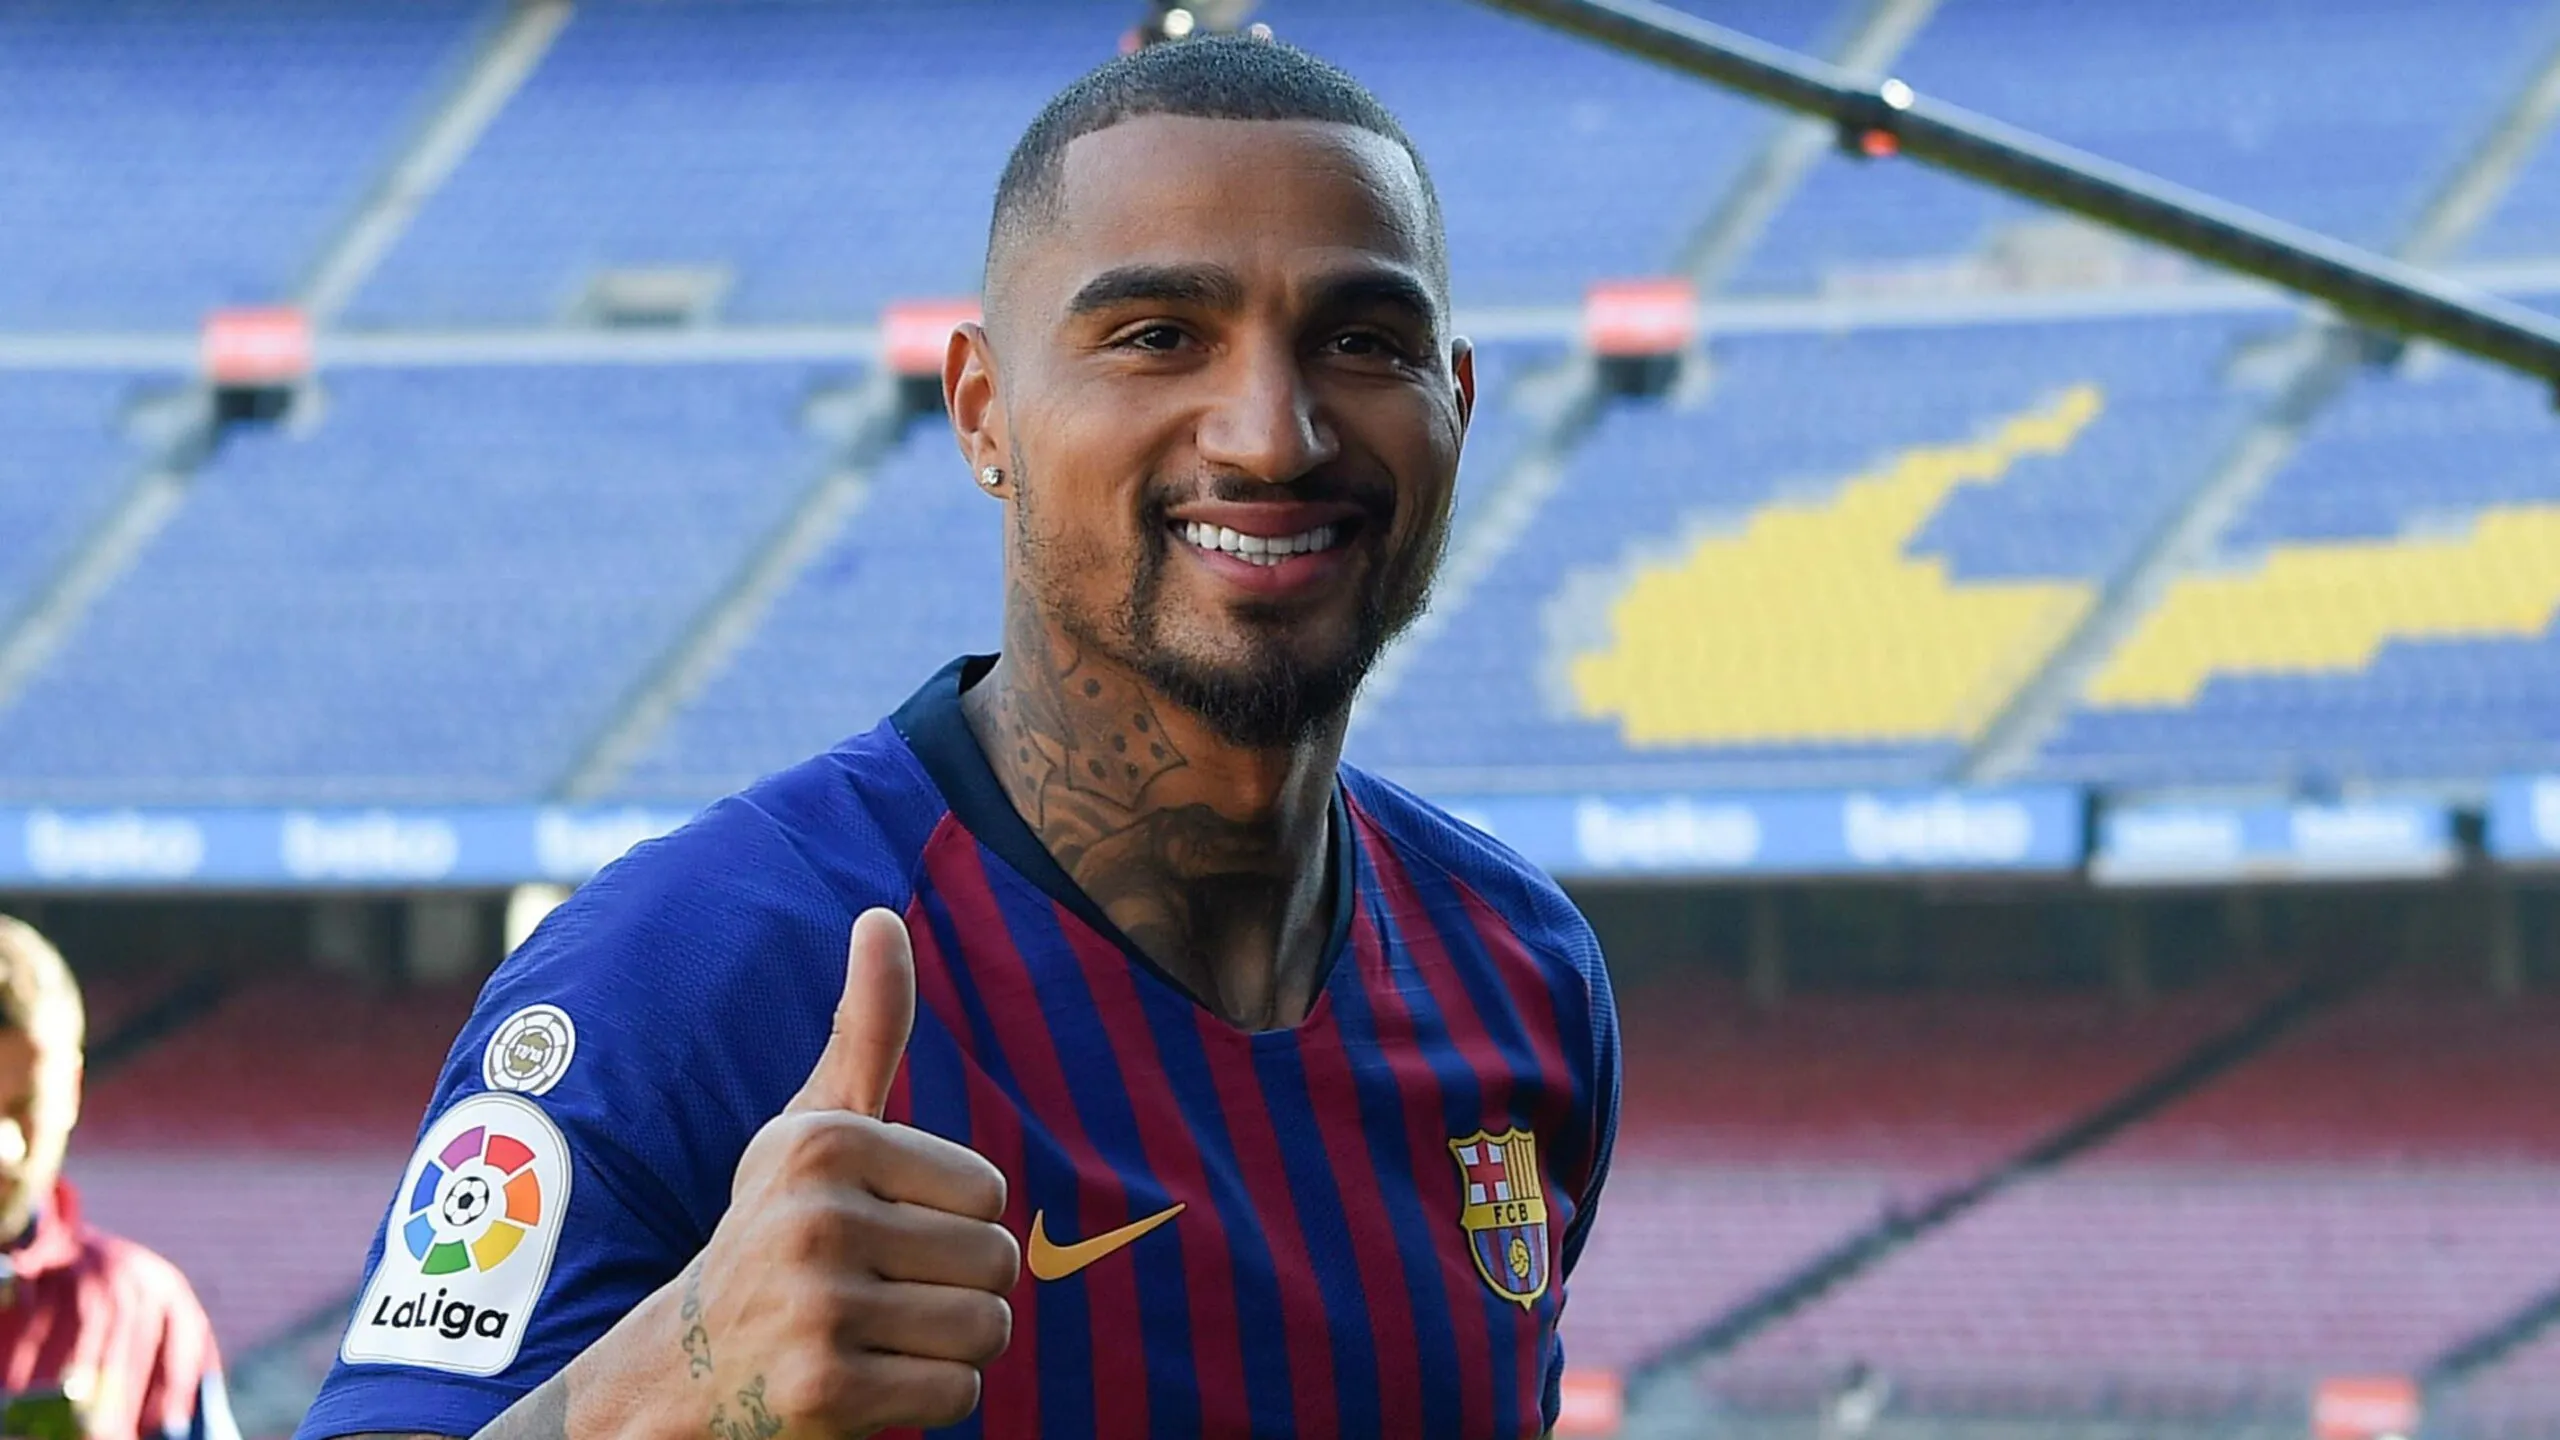 I would cost not less than €120 million in today’s transfer market – Kevin-Prince Boateng